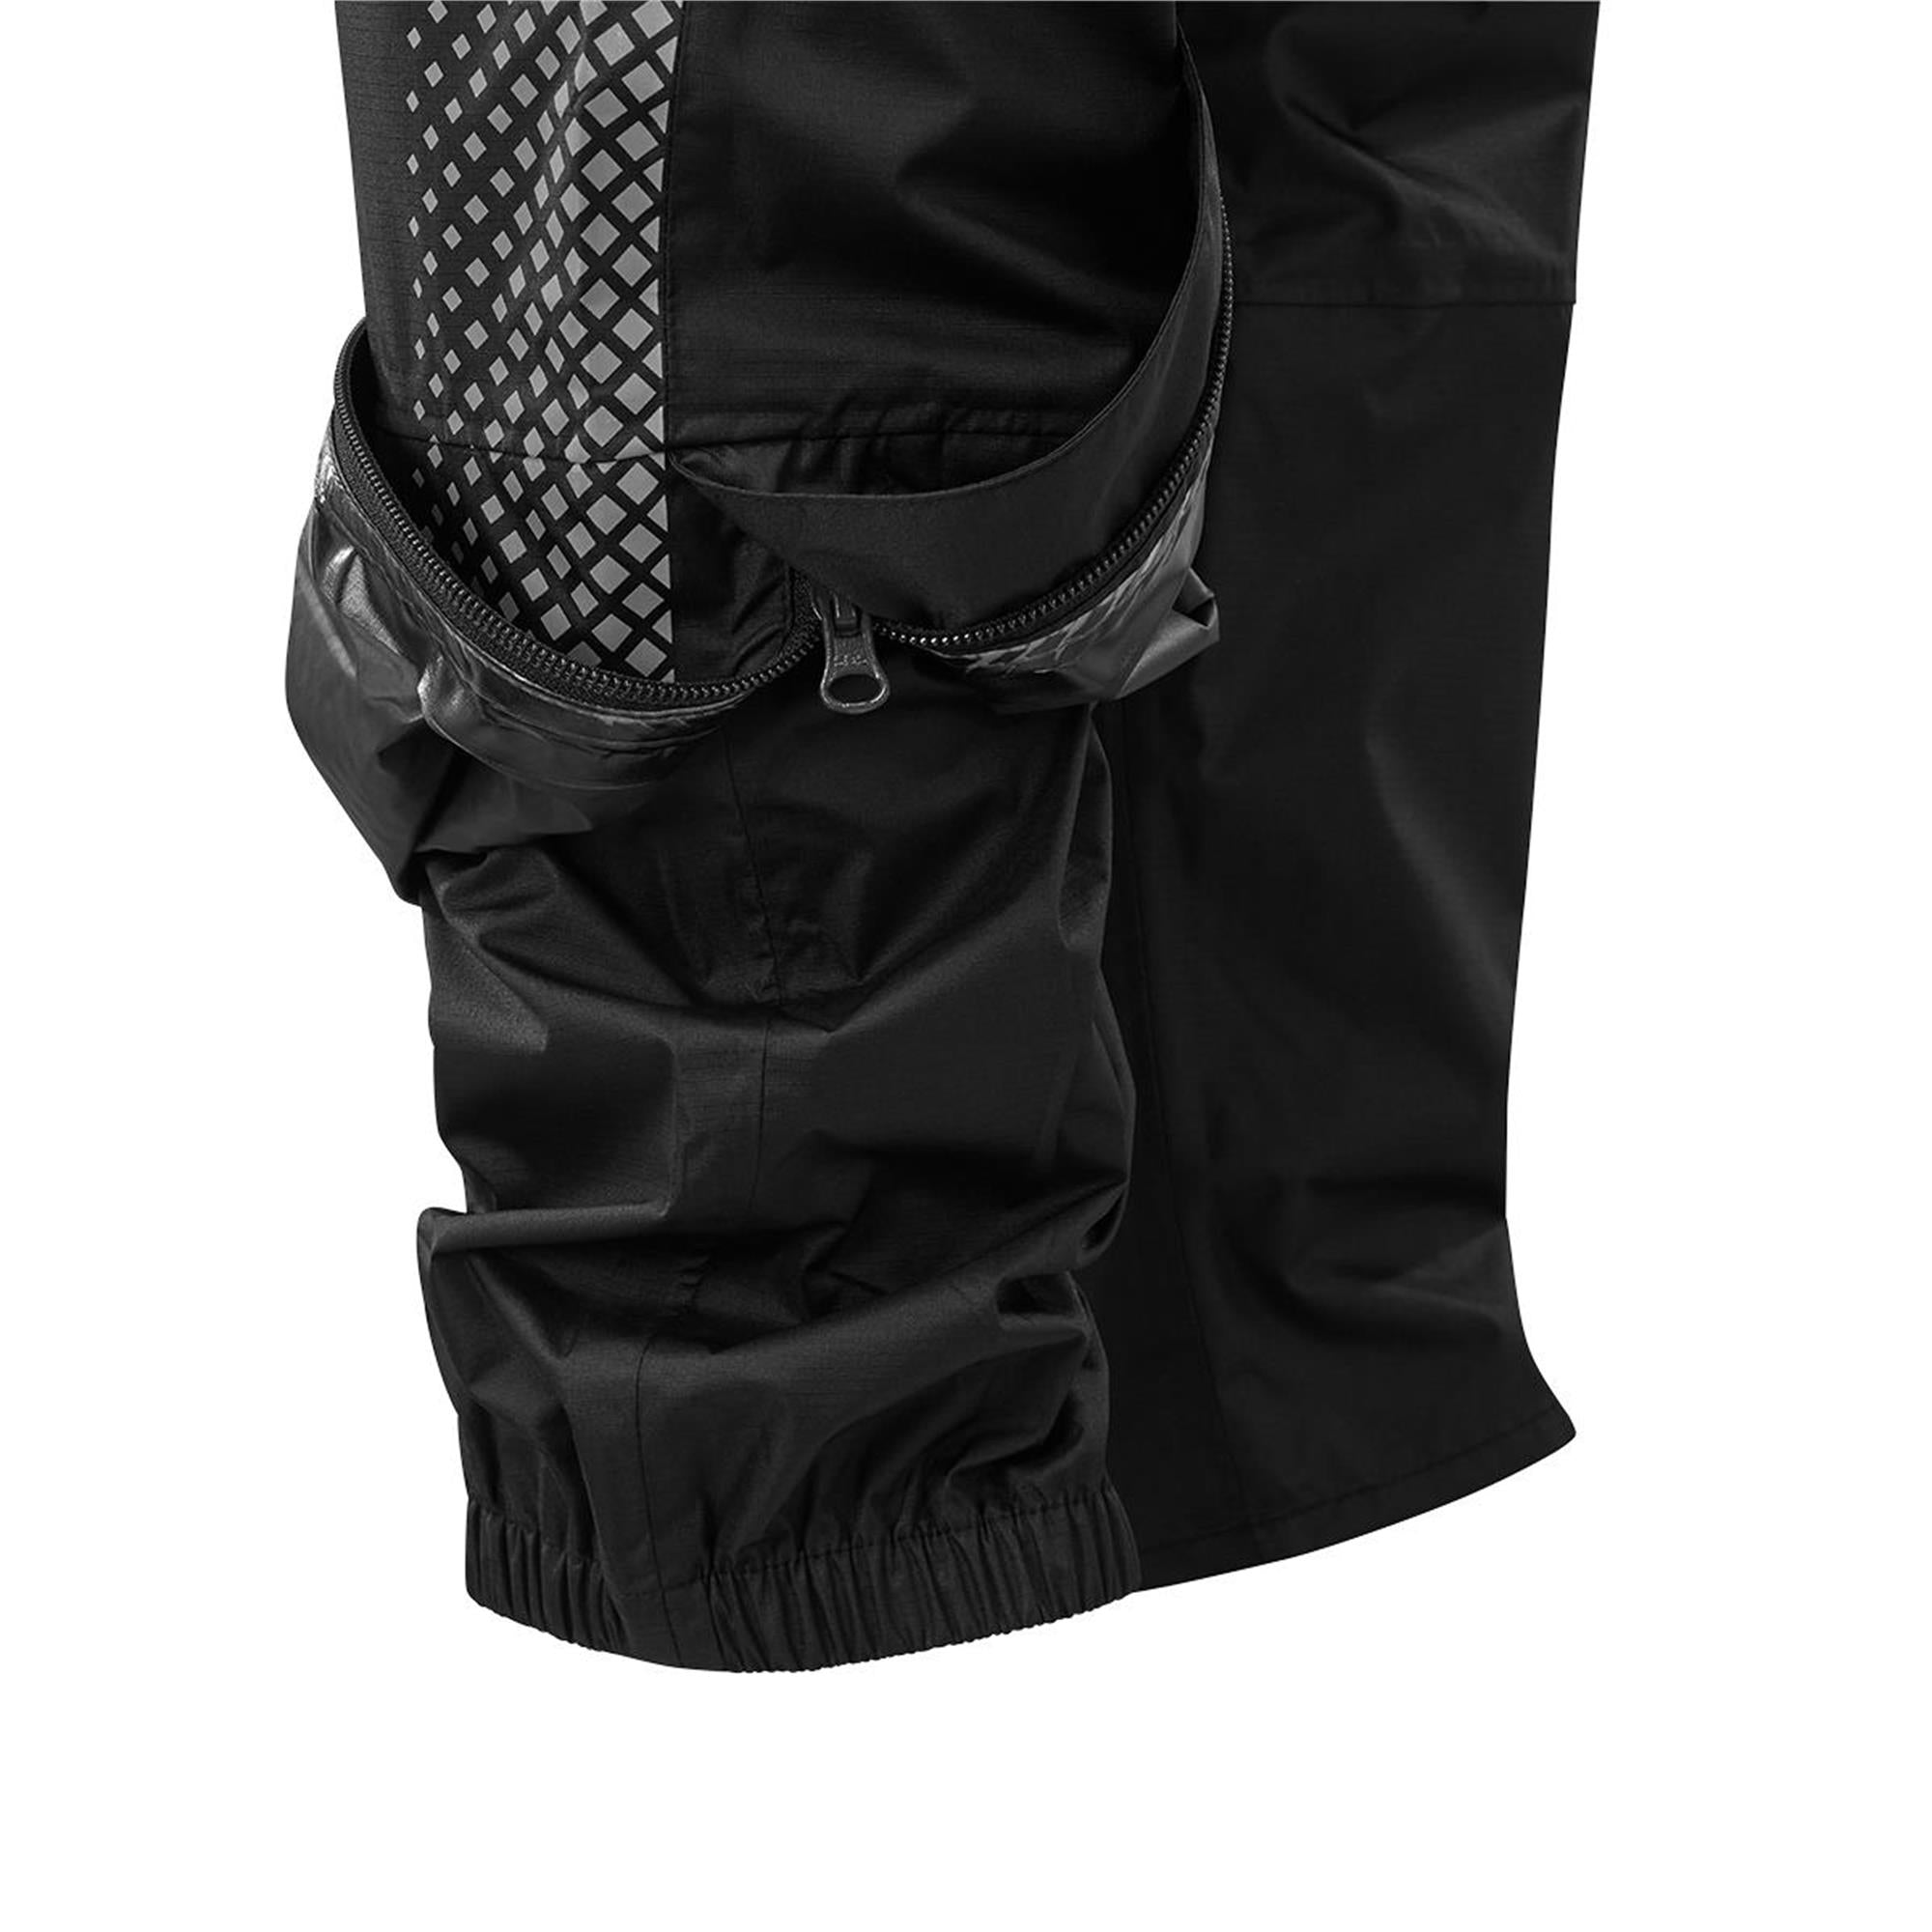 Altura Mens Nightvision Cycling Over Trousers - Black Vvgc | eBay